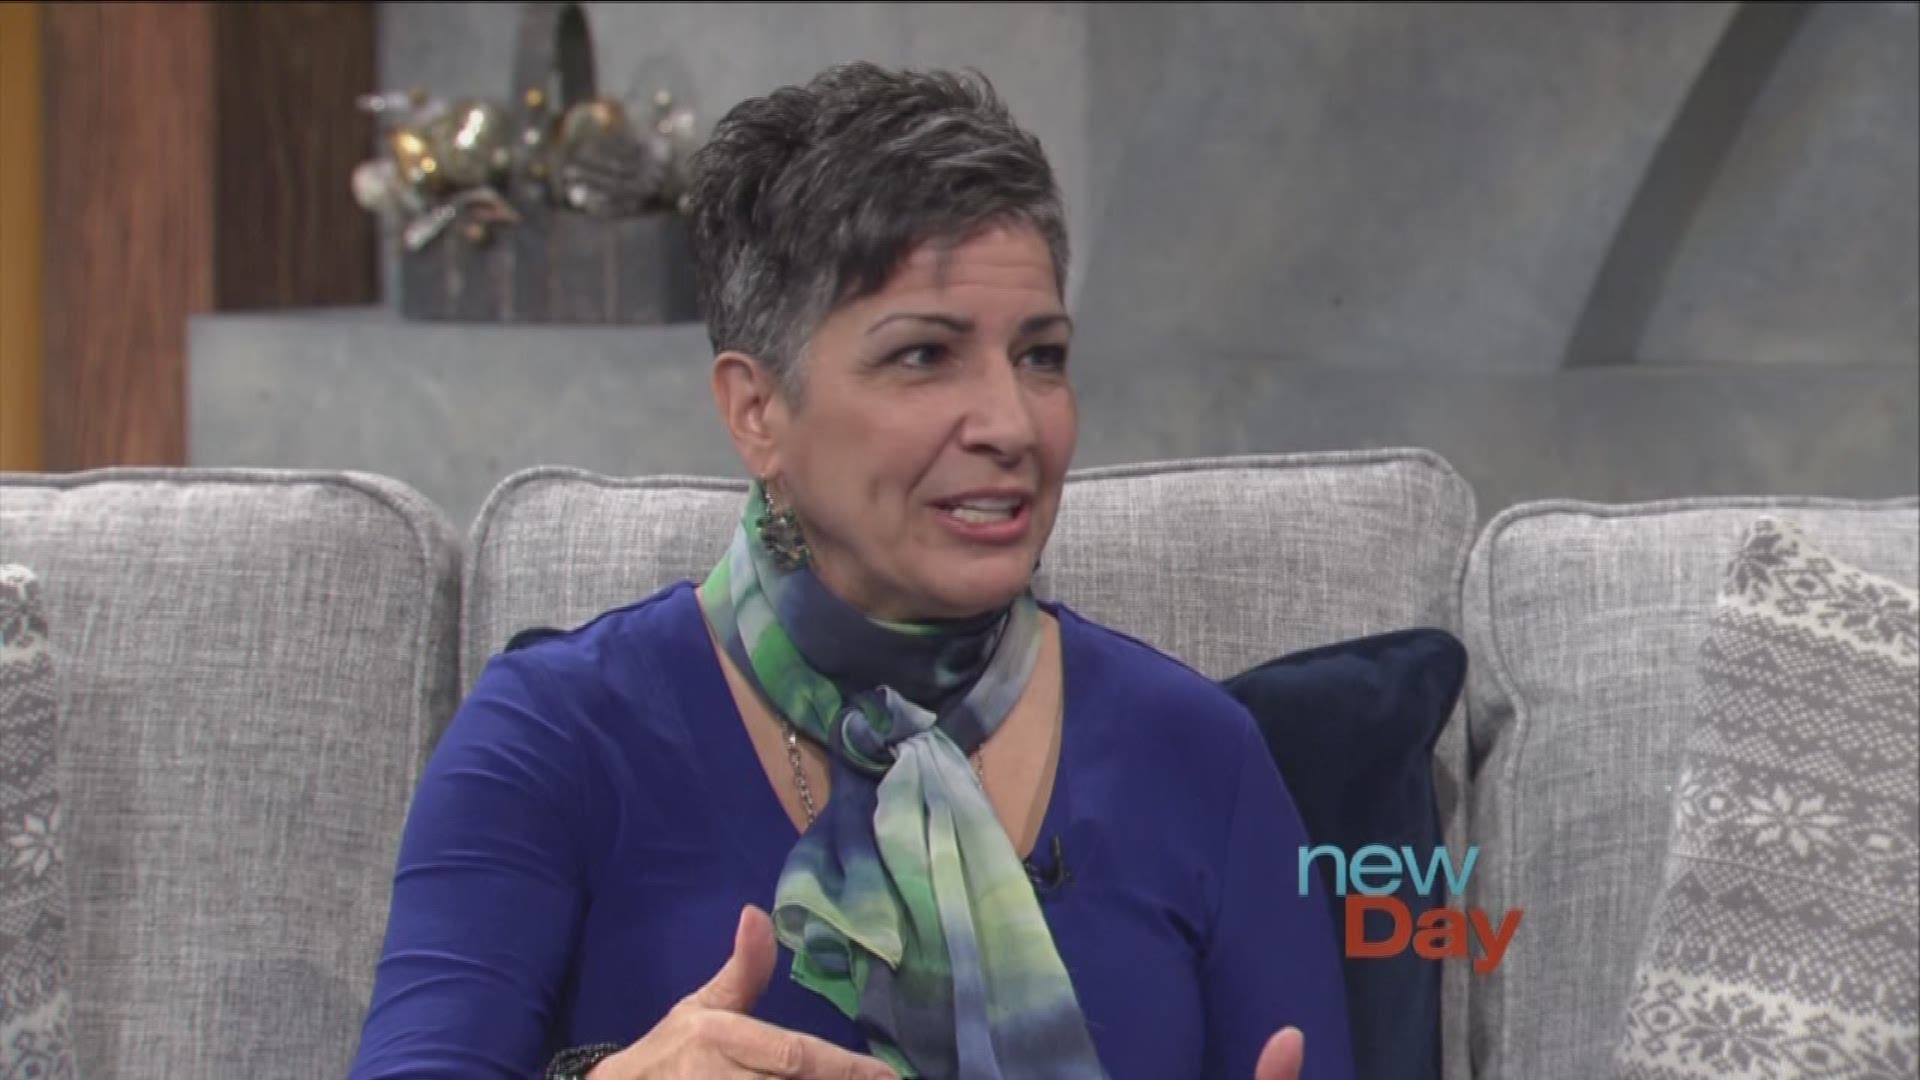 Carol Vecchio, a career counselor and founder of Centerpoint Institute for Life and Career Renewal, joined host Margaret Larson to talk about challenges facing people entering the workforce or looking to change careers.